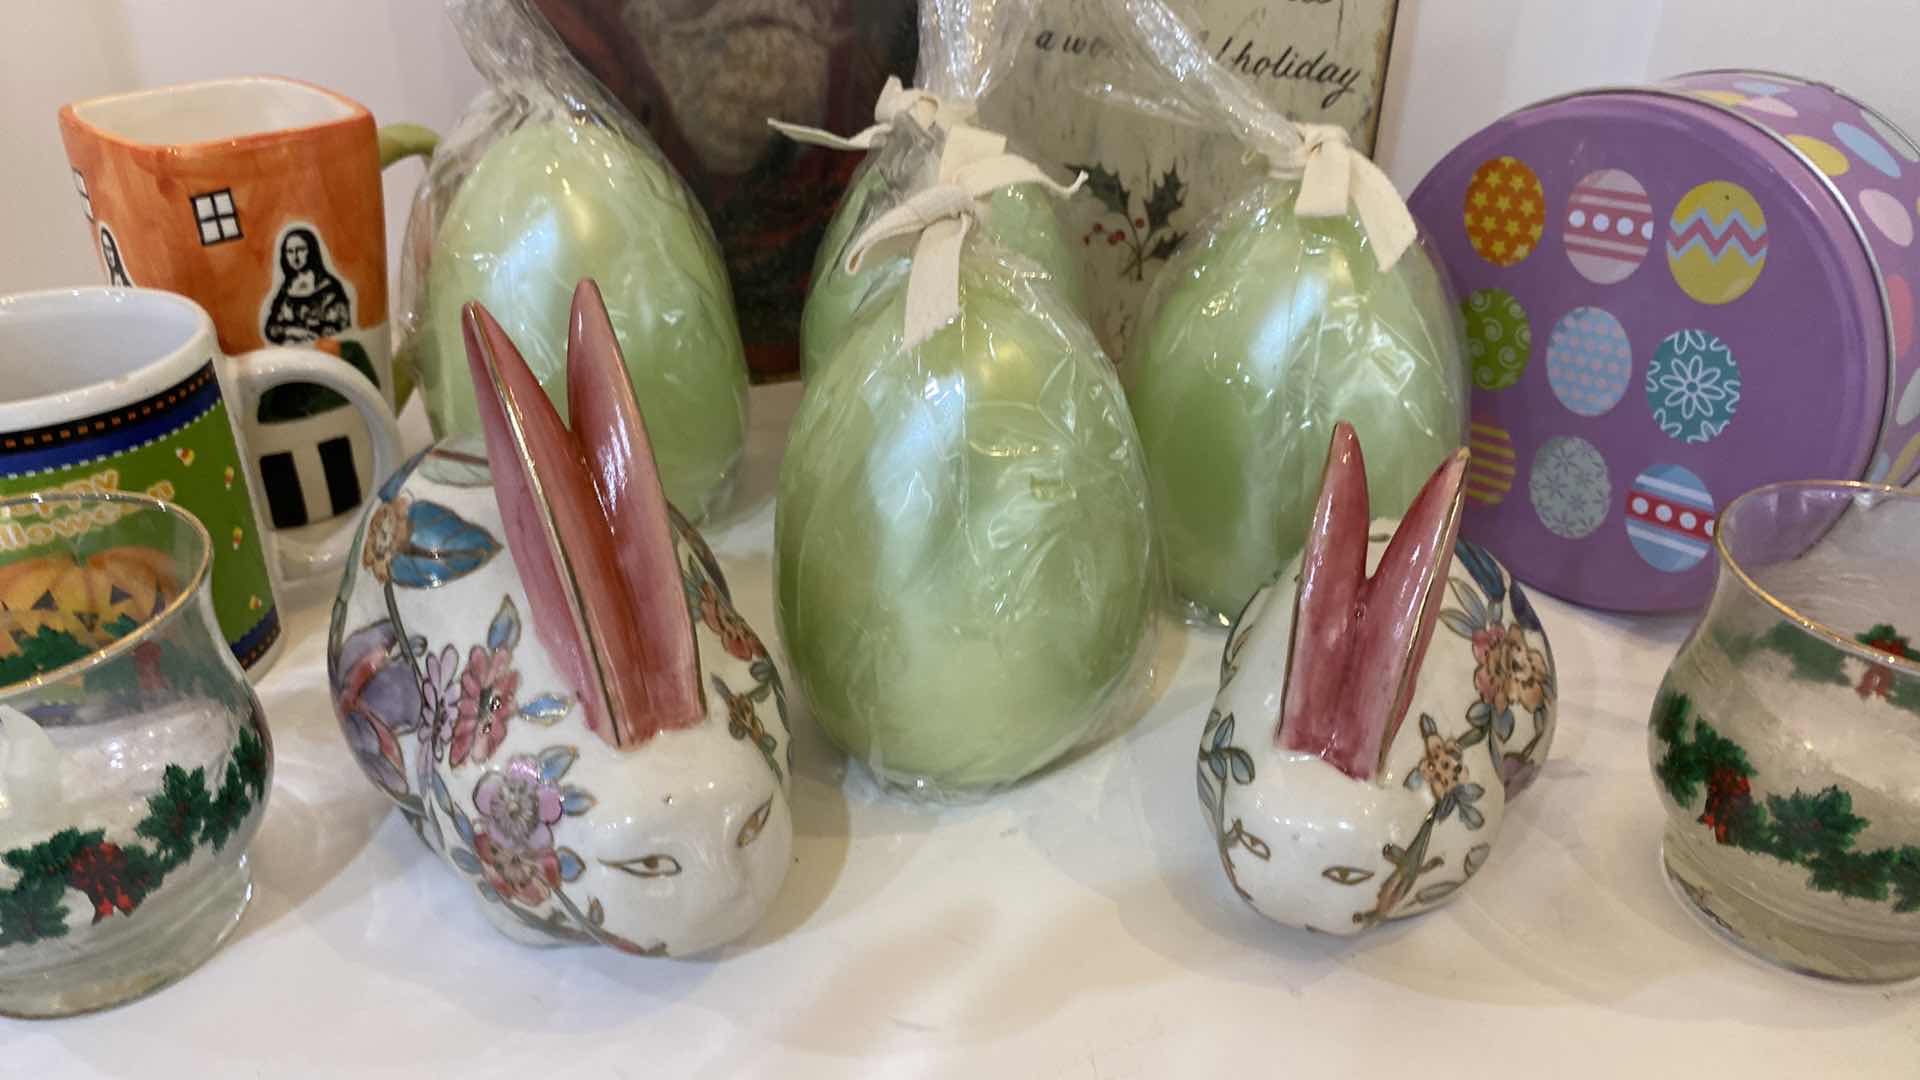 Photo 2 of ASSORTED HOLIDAY DECOR - EGG CANDLES FROM POTTERY BARN